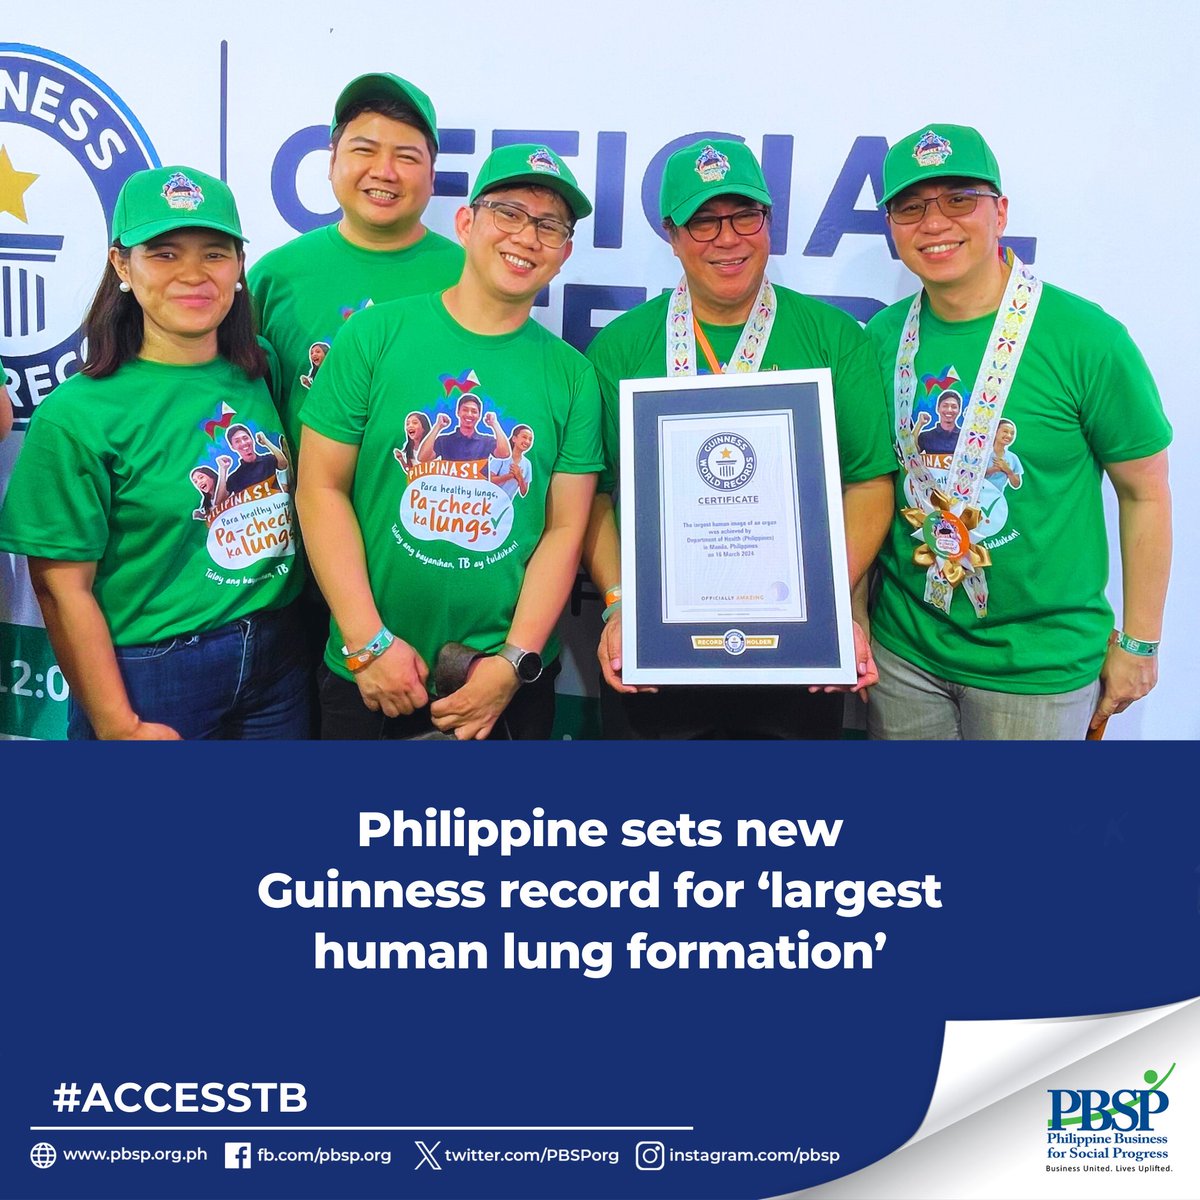 READ MORE: bit.ly/43kiRuQ 'The country has set a new Guinness World Record for the largest human lung formation after close to 6,000 participants showed up at the Quirino Grandstand in Manila to raise awareness on tuberculosis (TB).' #ACCESSTB #PBSP